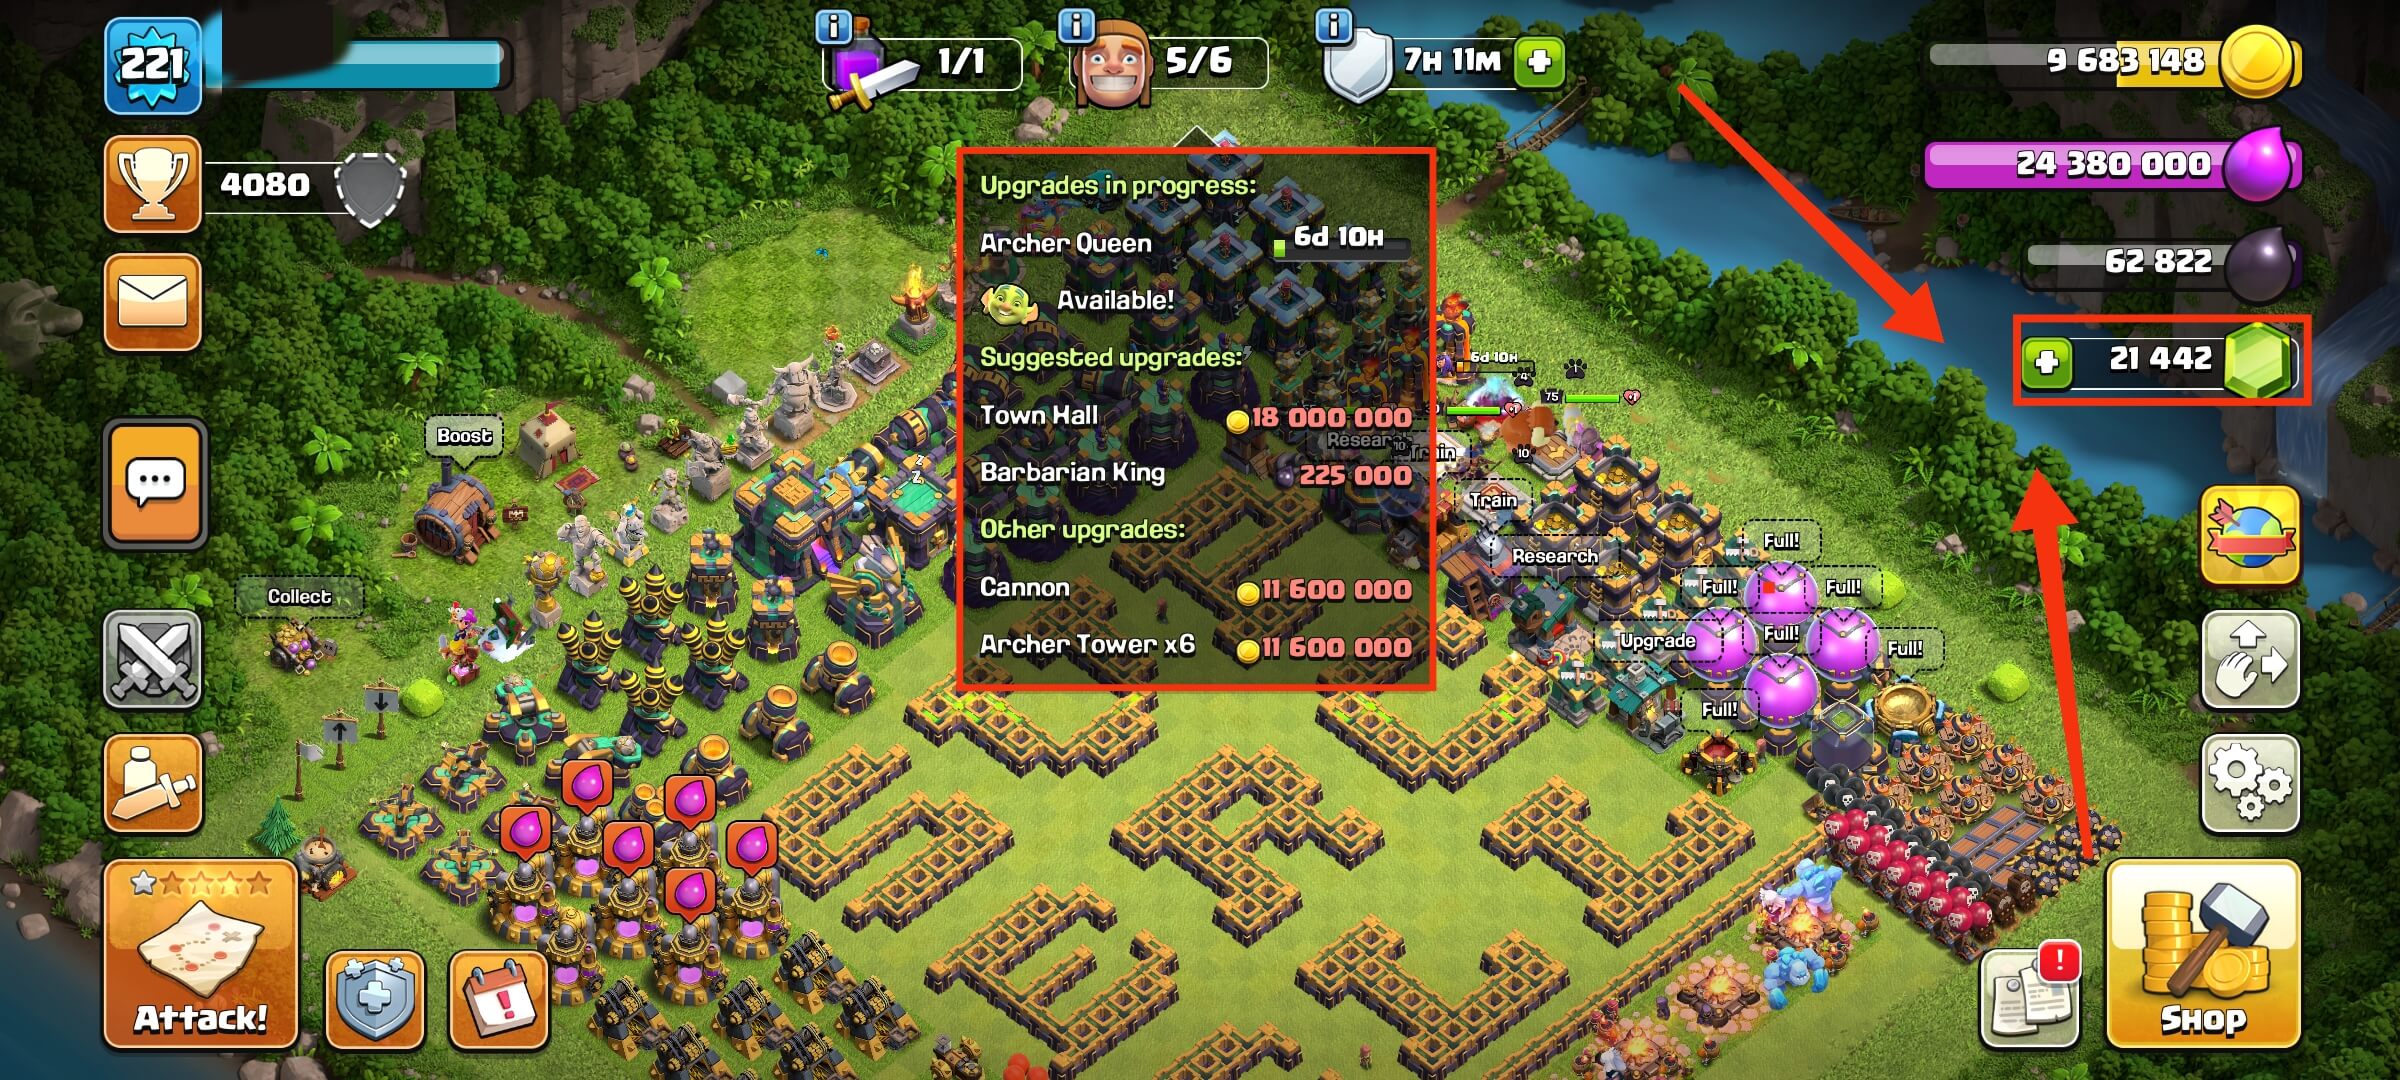 Excellent TH14 Max-21000 gem-8 Skin Hero-Lifetime Warranty King Gloves-History-Fireball-SC ID-XP221-Instant delivery less than 1 minute